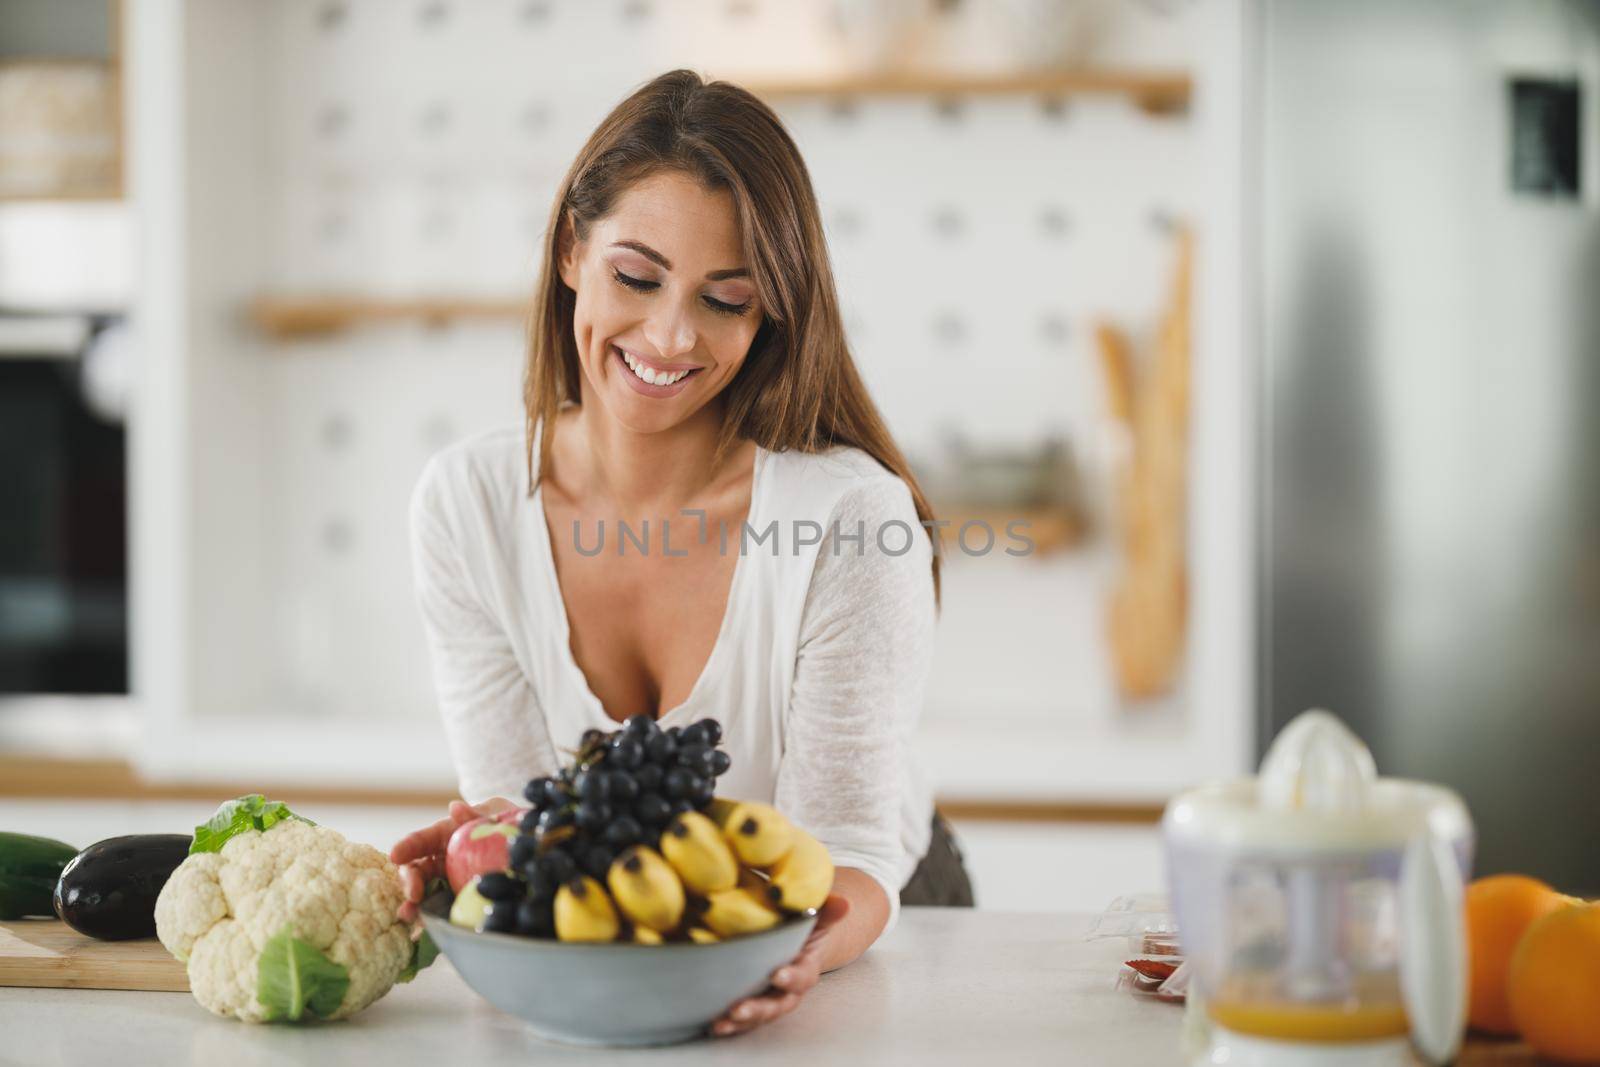 Shot of a young woman preparing a healthy meal in her kitchen.